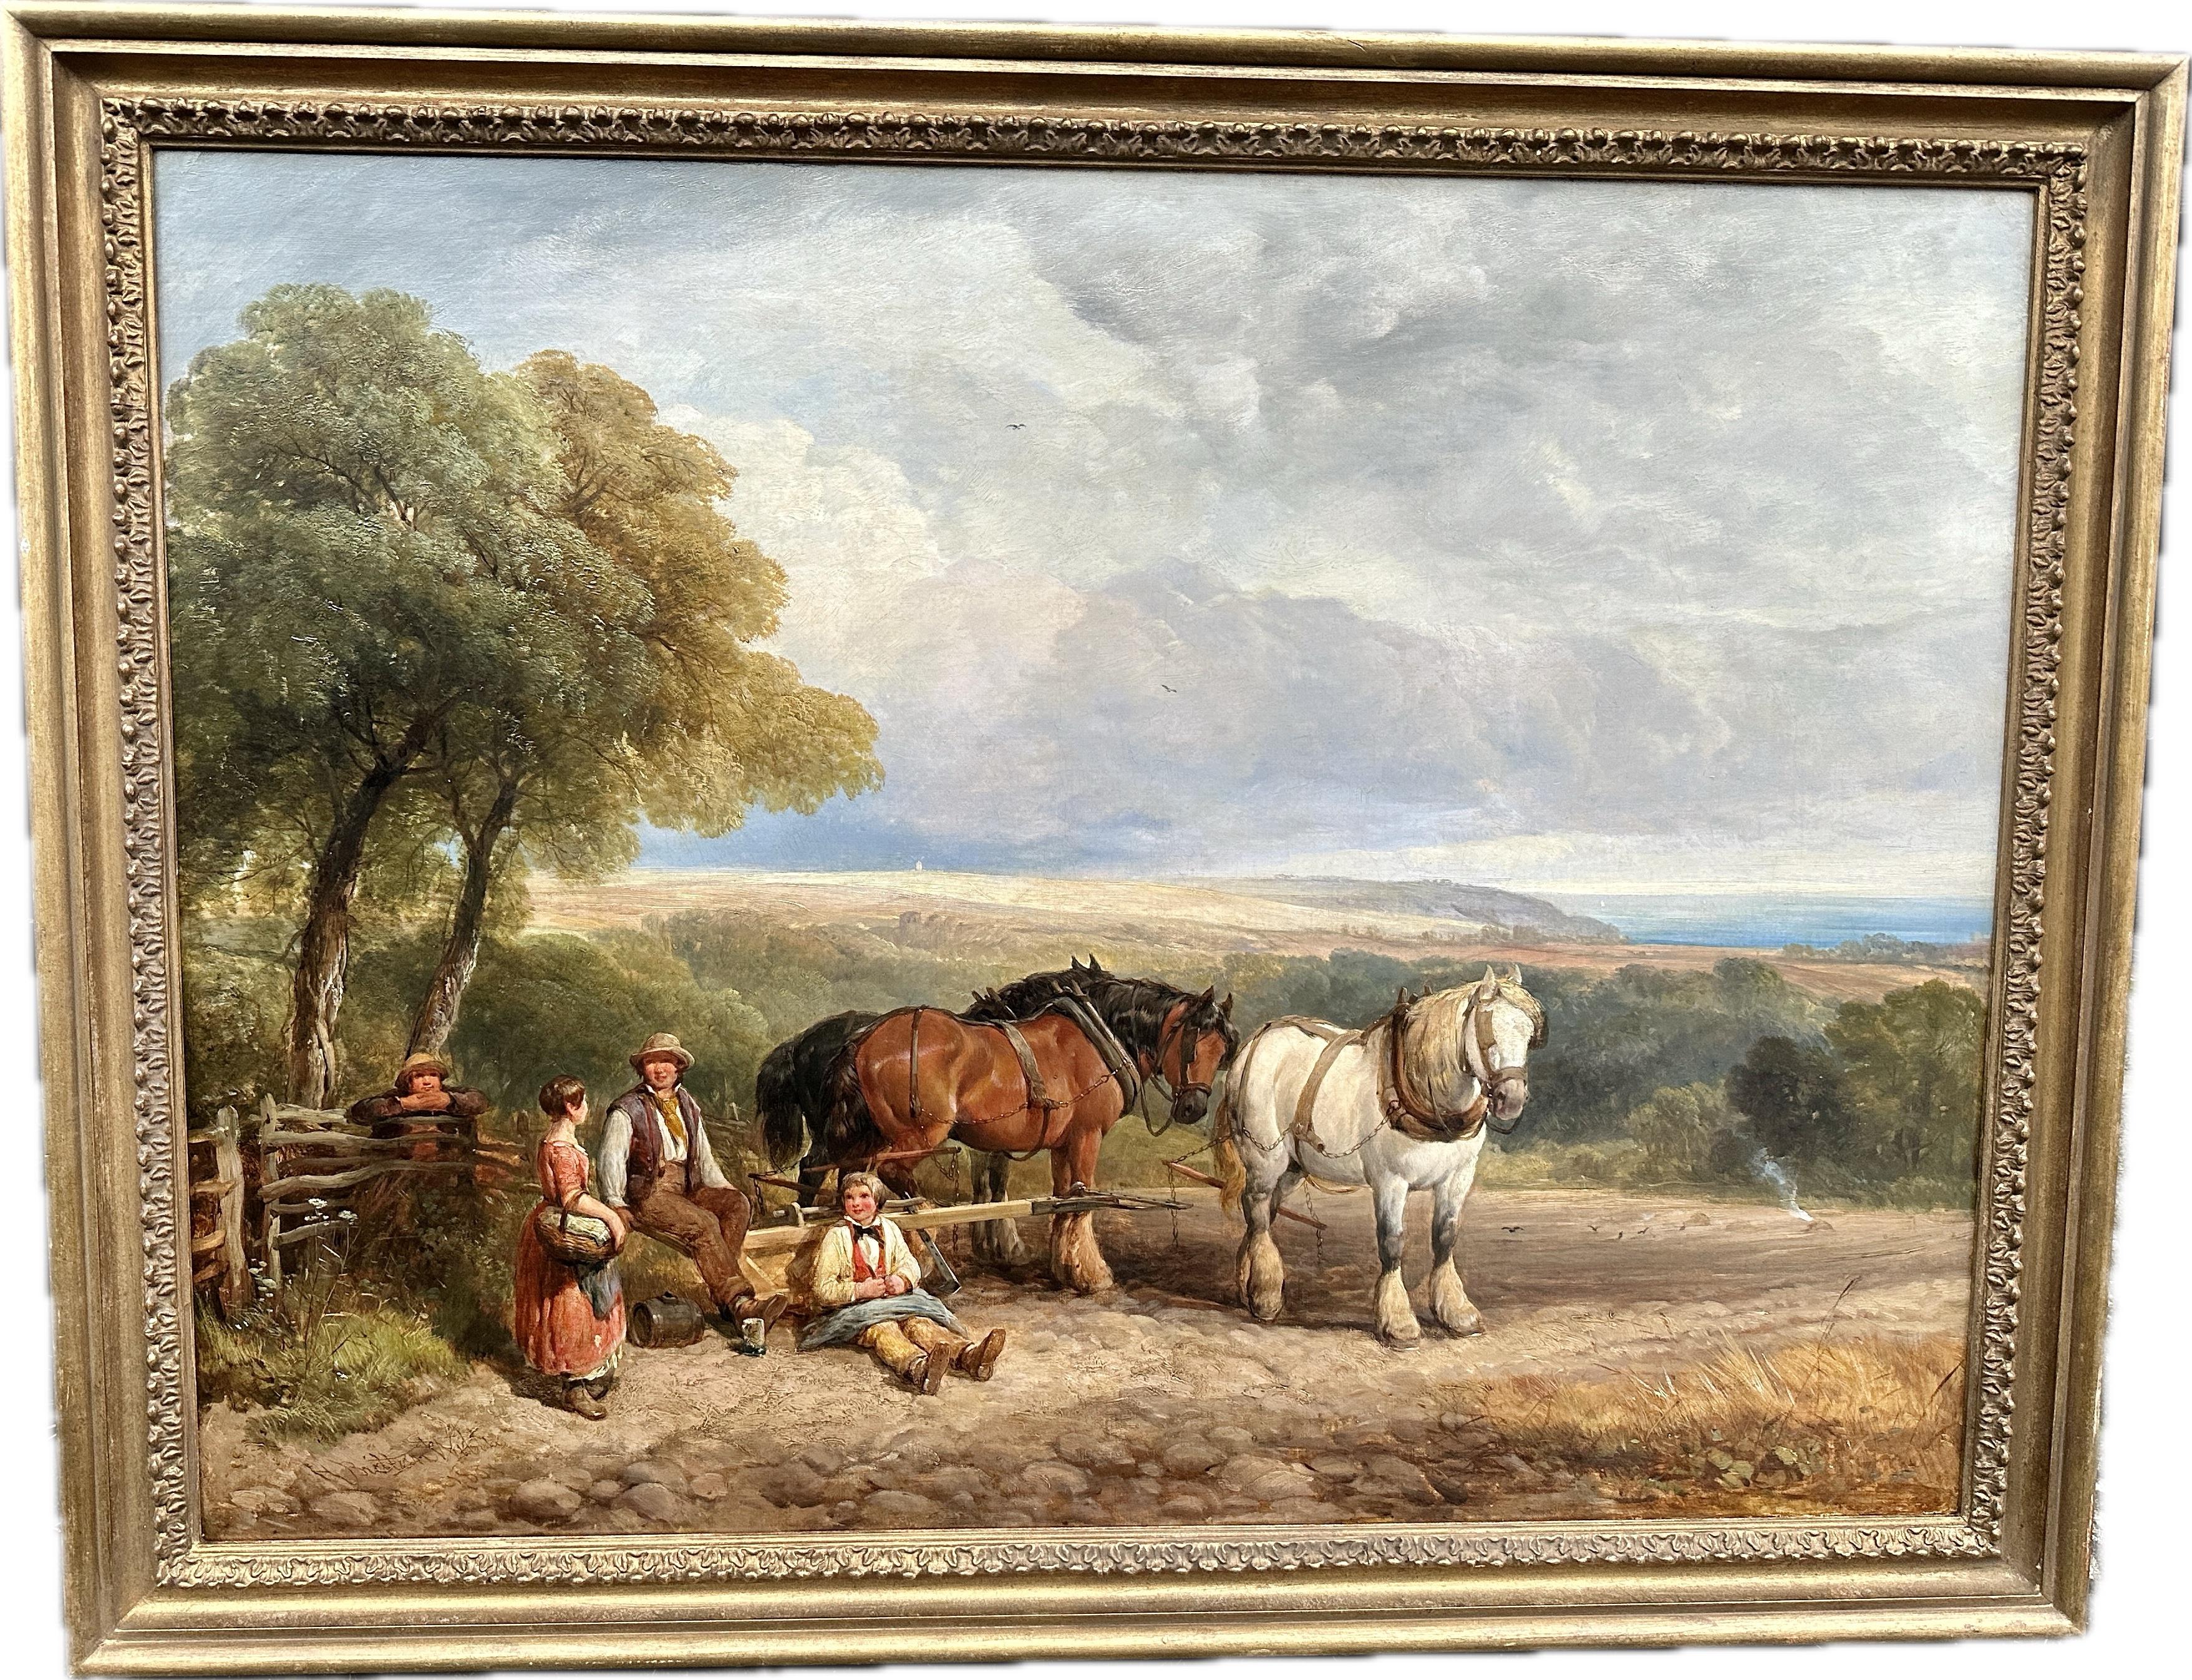 Henry Brittan Willis Landscape Painting - 19th century English Harvest landscape with horses, farmers, children, family